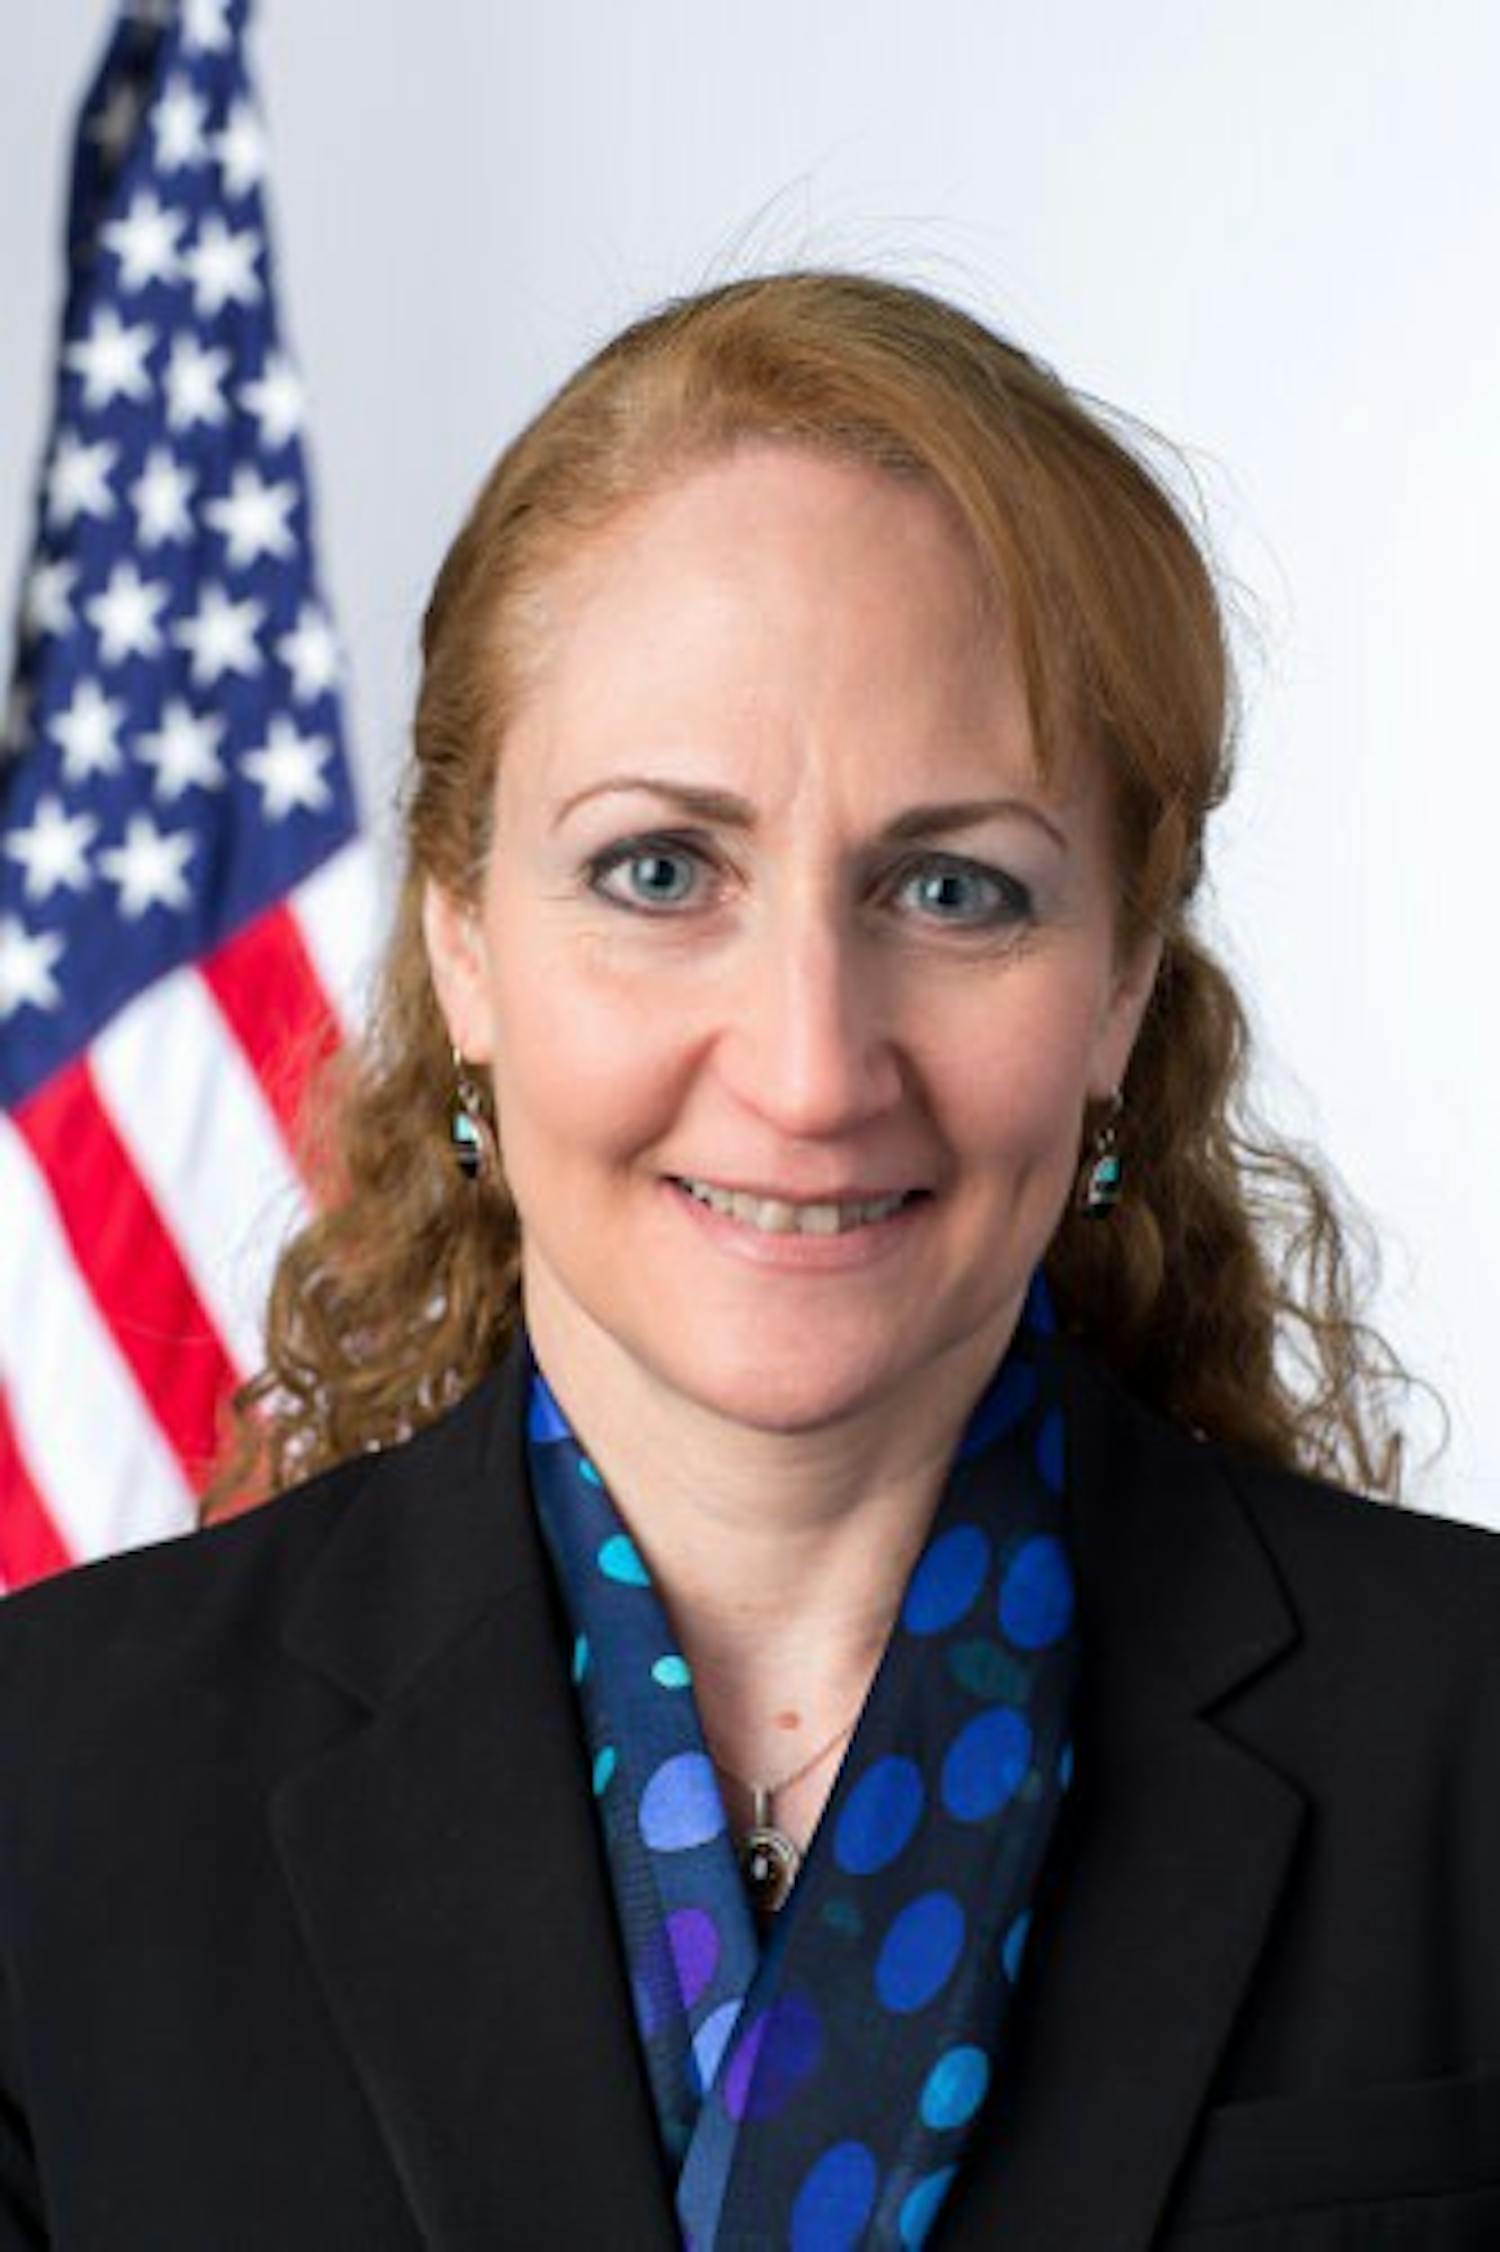 Jo Handelsman, currently a professor at Yale University, will take over as director of the Wisconsin Institute for Discovery Feb. 1.